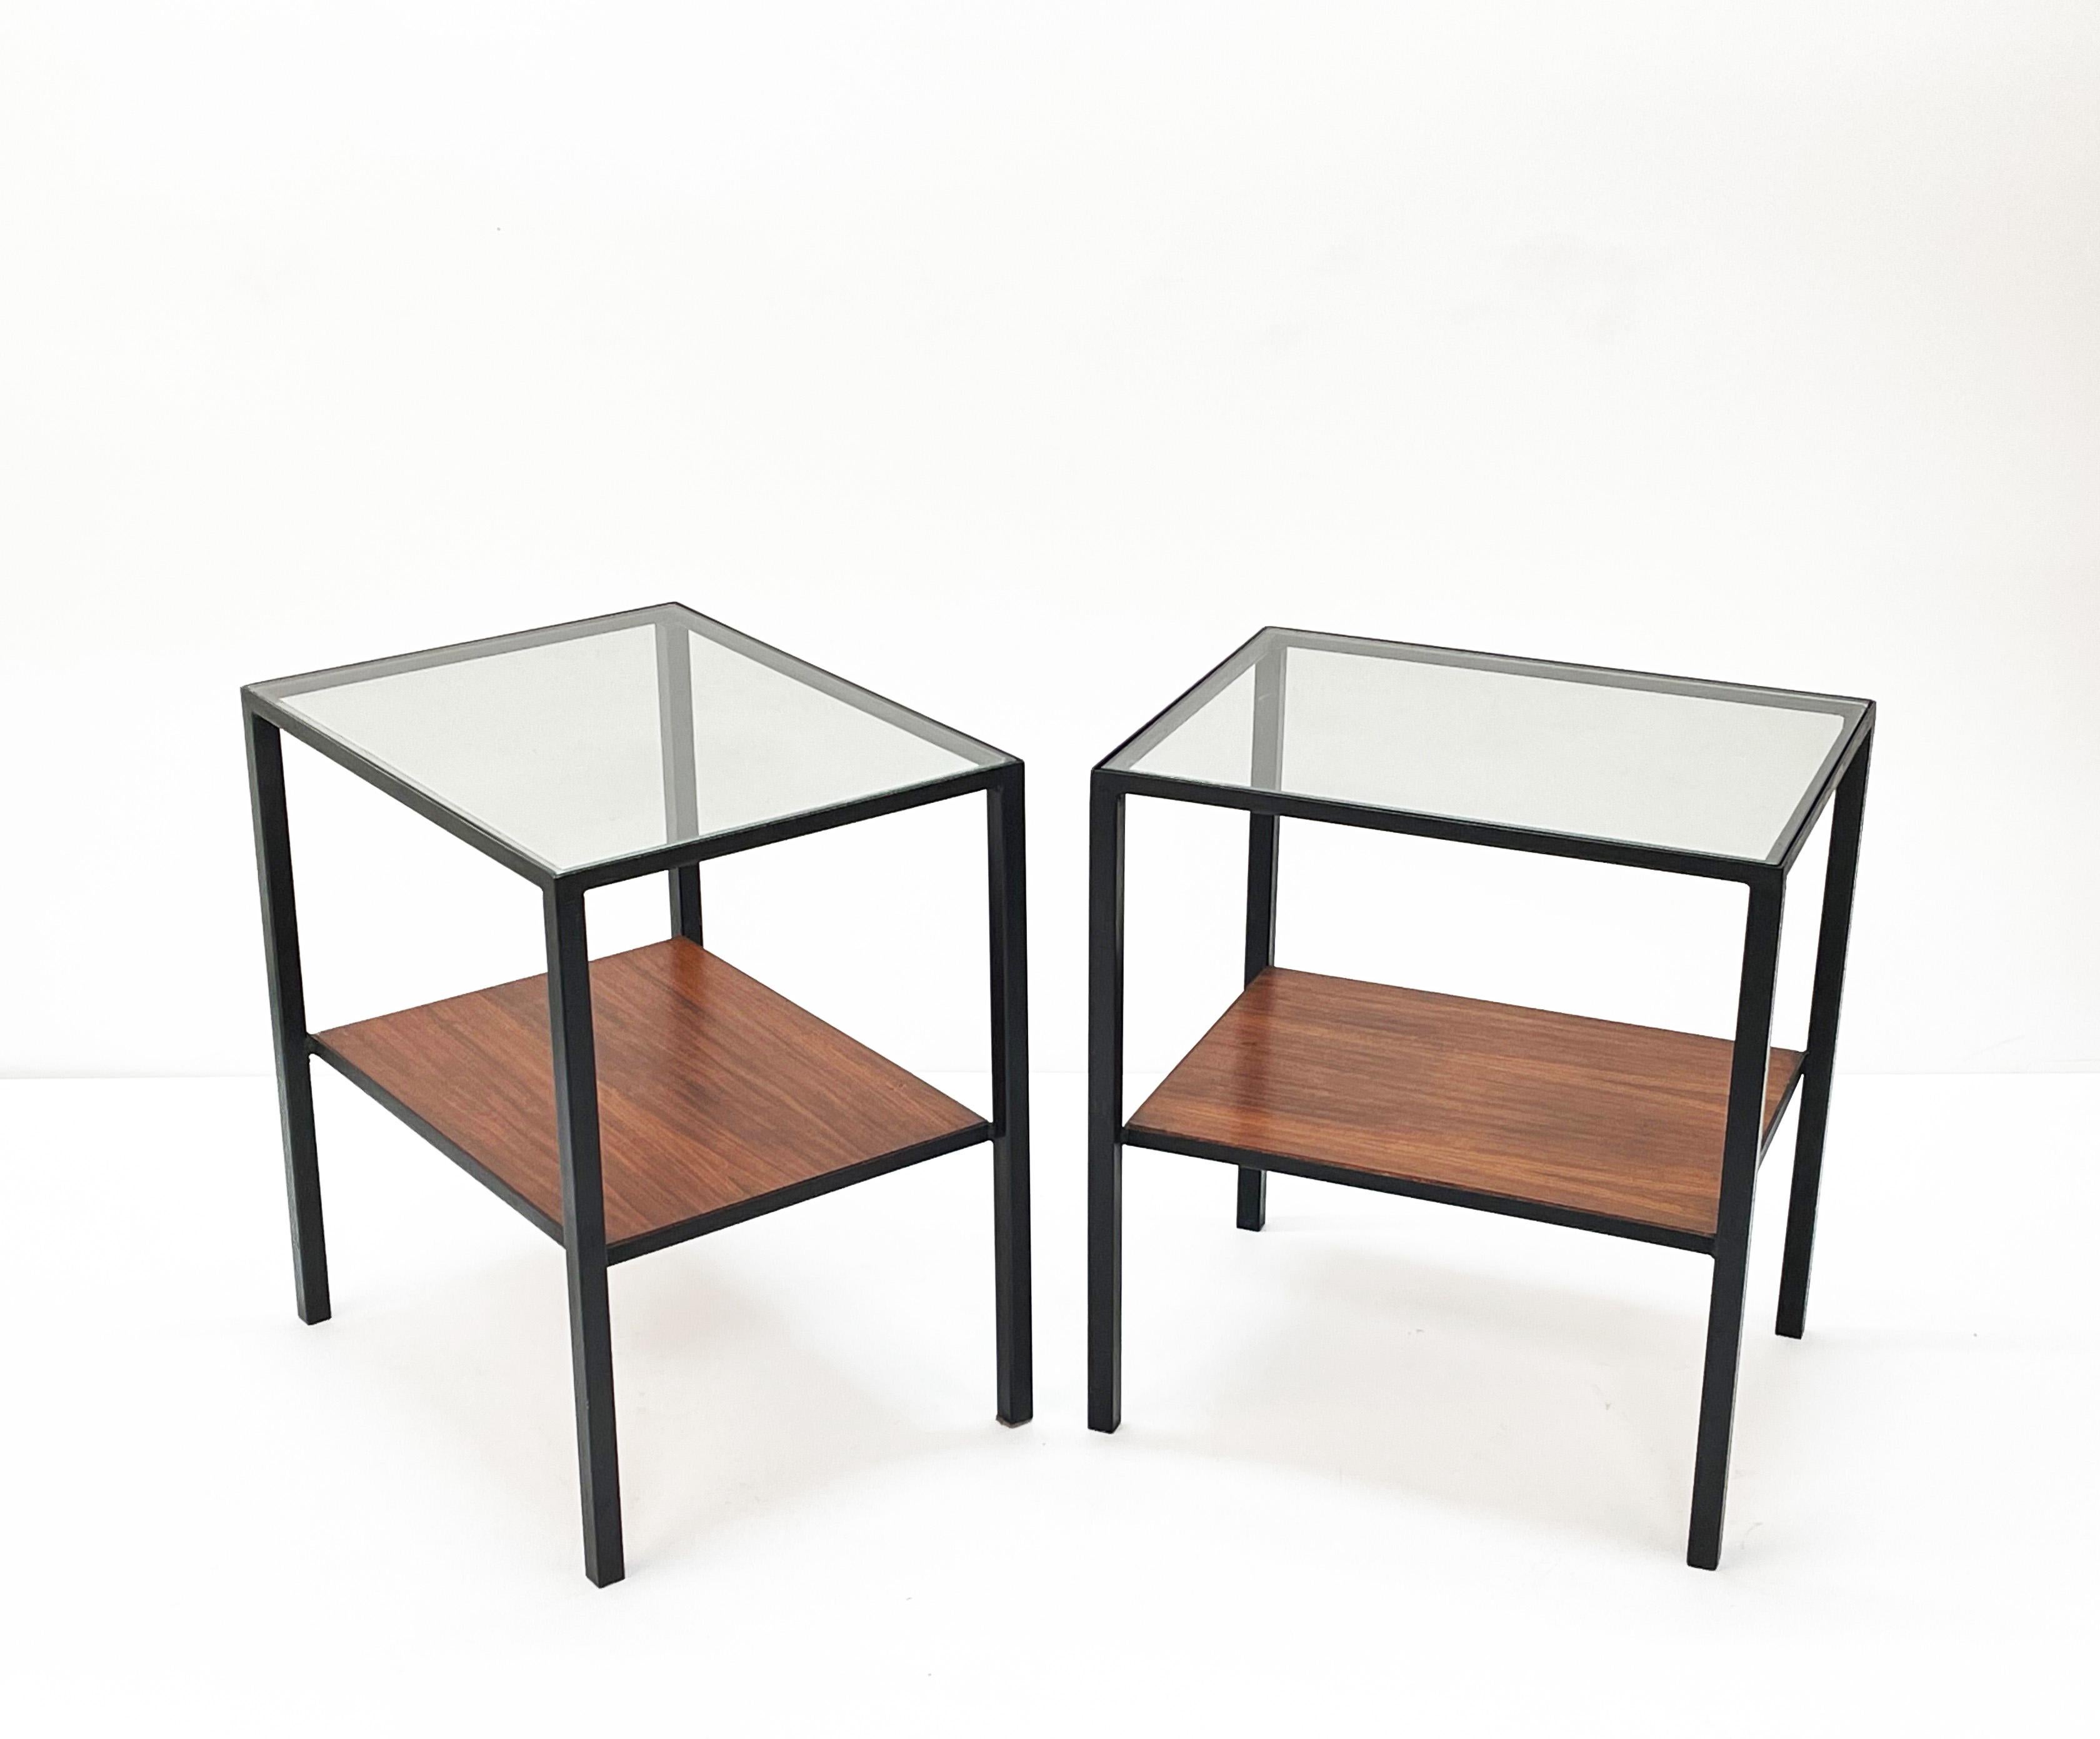 Pair of Iron, Glass and Wood Italian Coffee Table with Two Shelves, 1960s For Sale 7